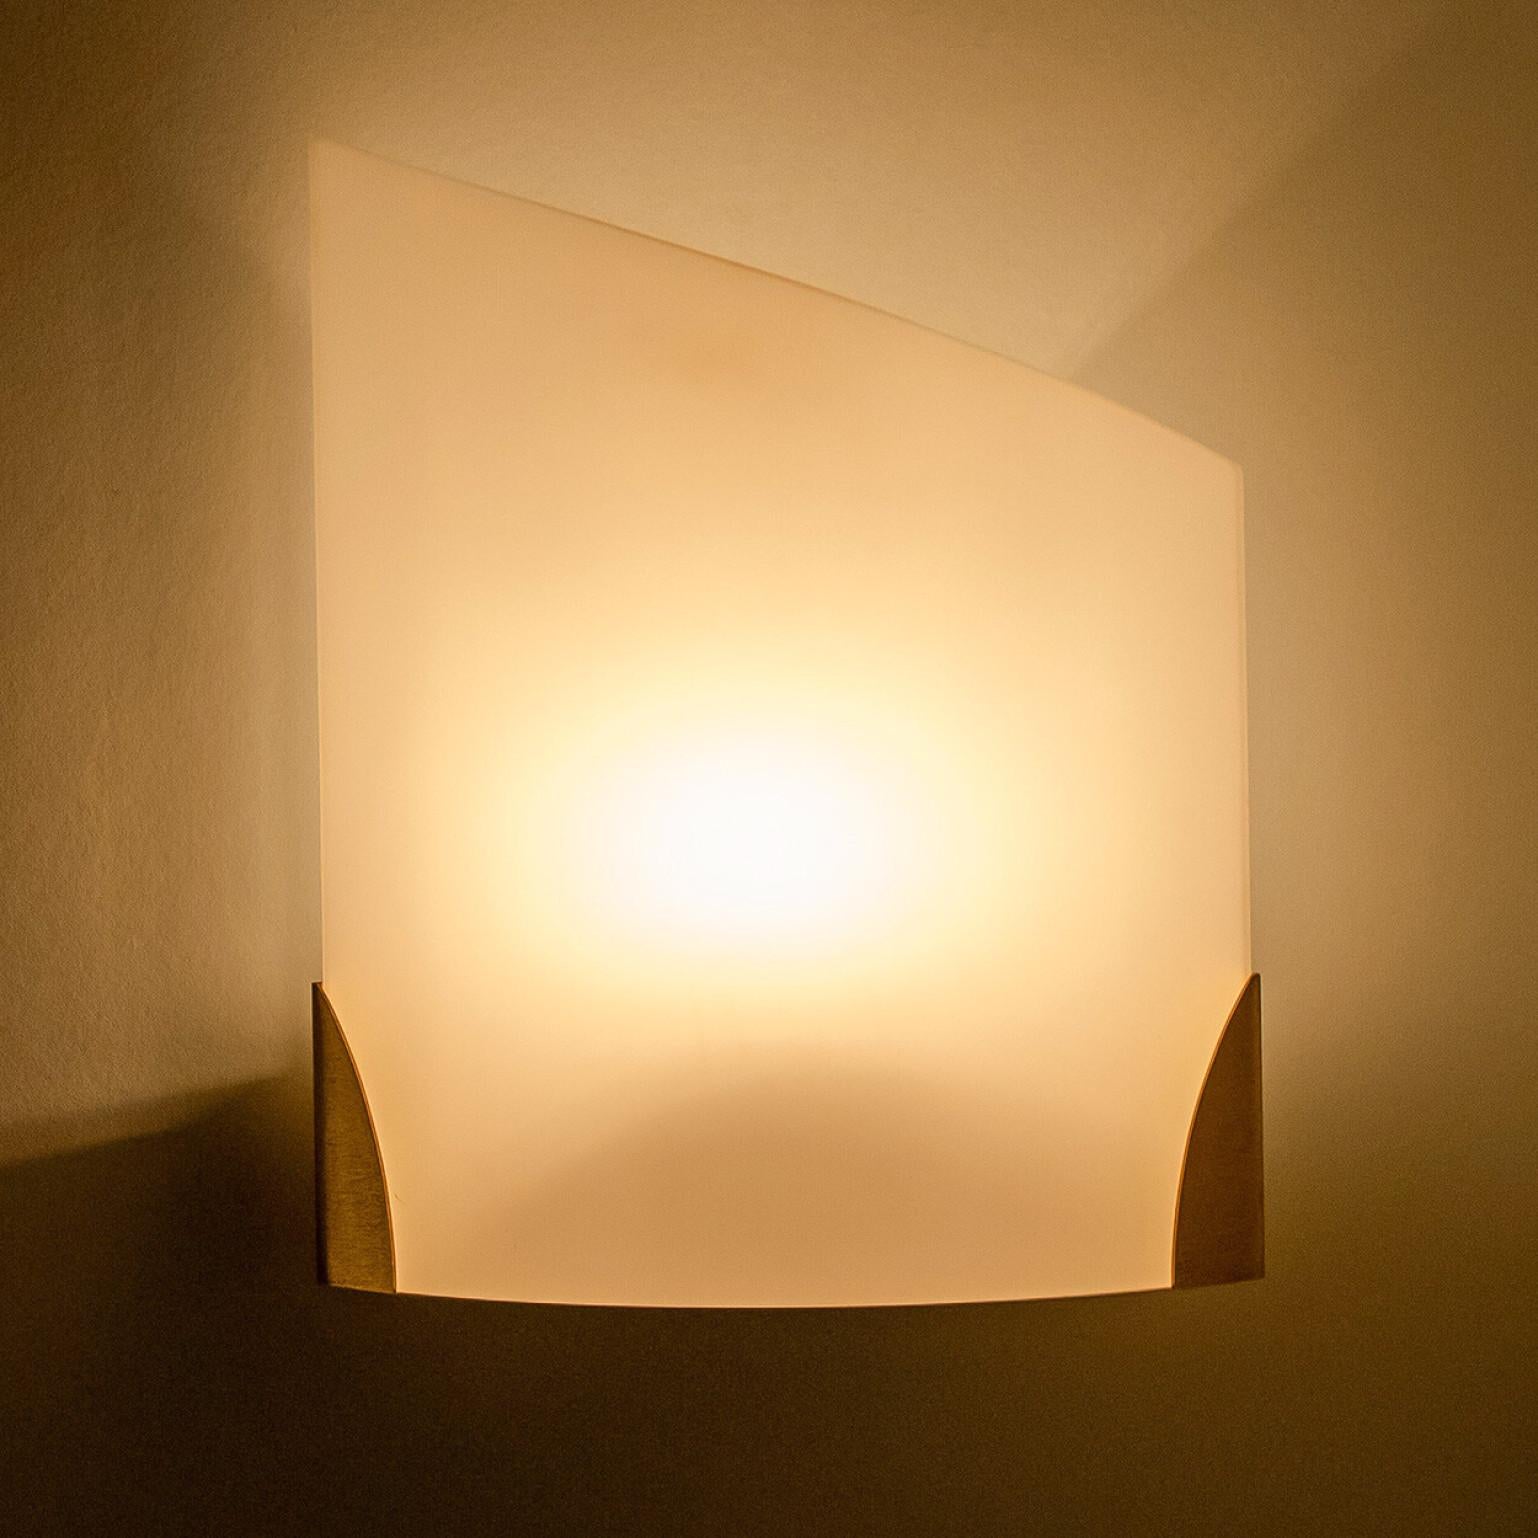 1 of 4 Cylinder Shaped White Opaque Glass Wall Lights by Glashütte Limburg In Good Condition For Sale In Rijssen, NL